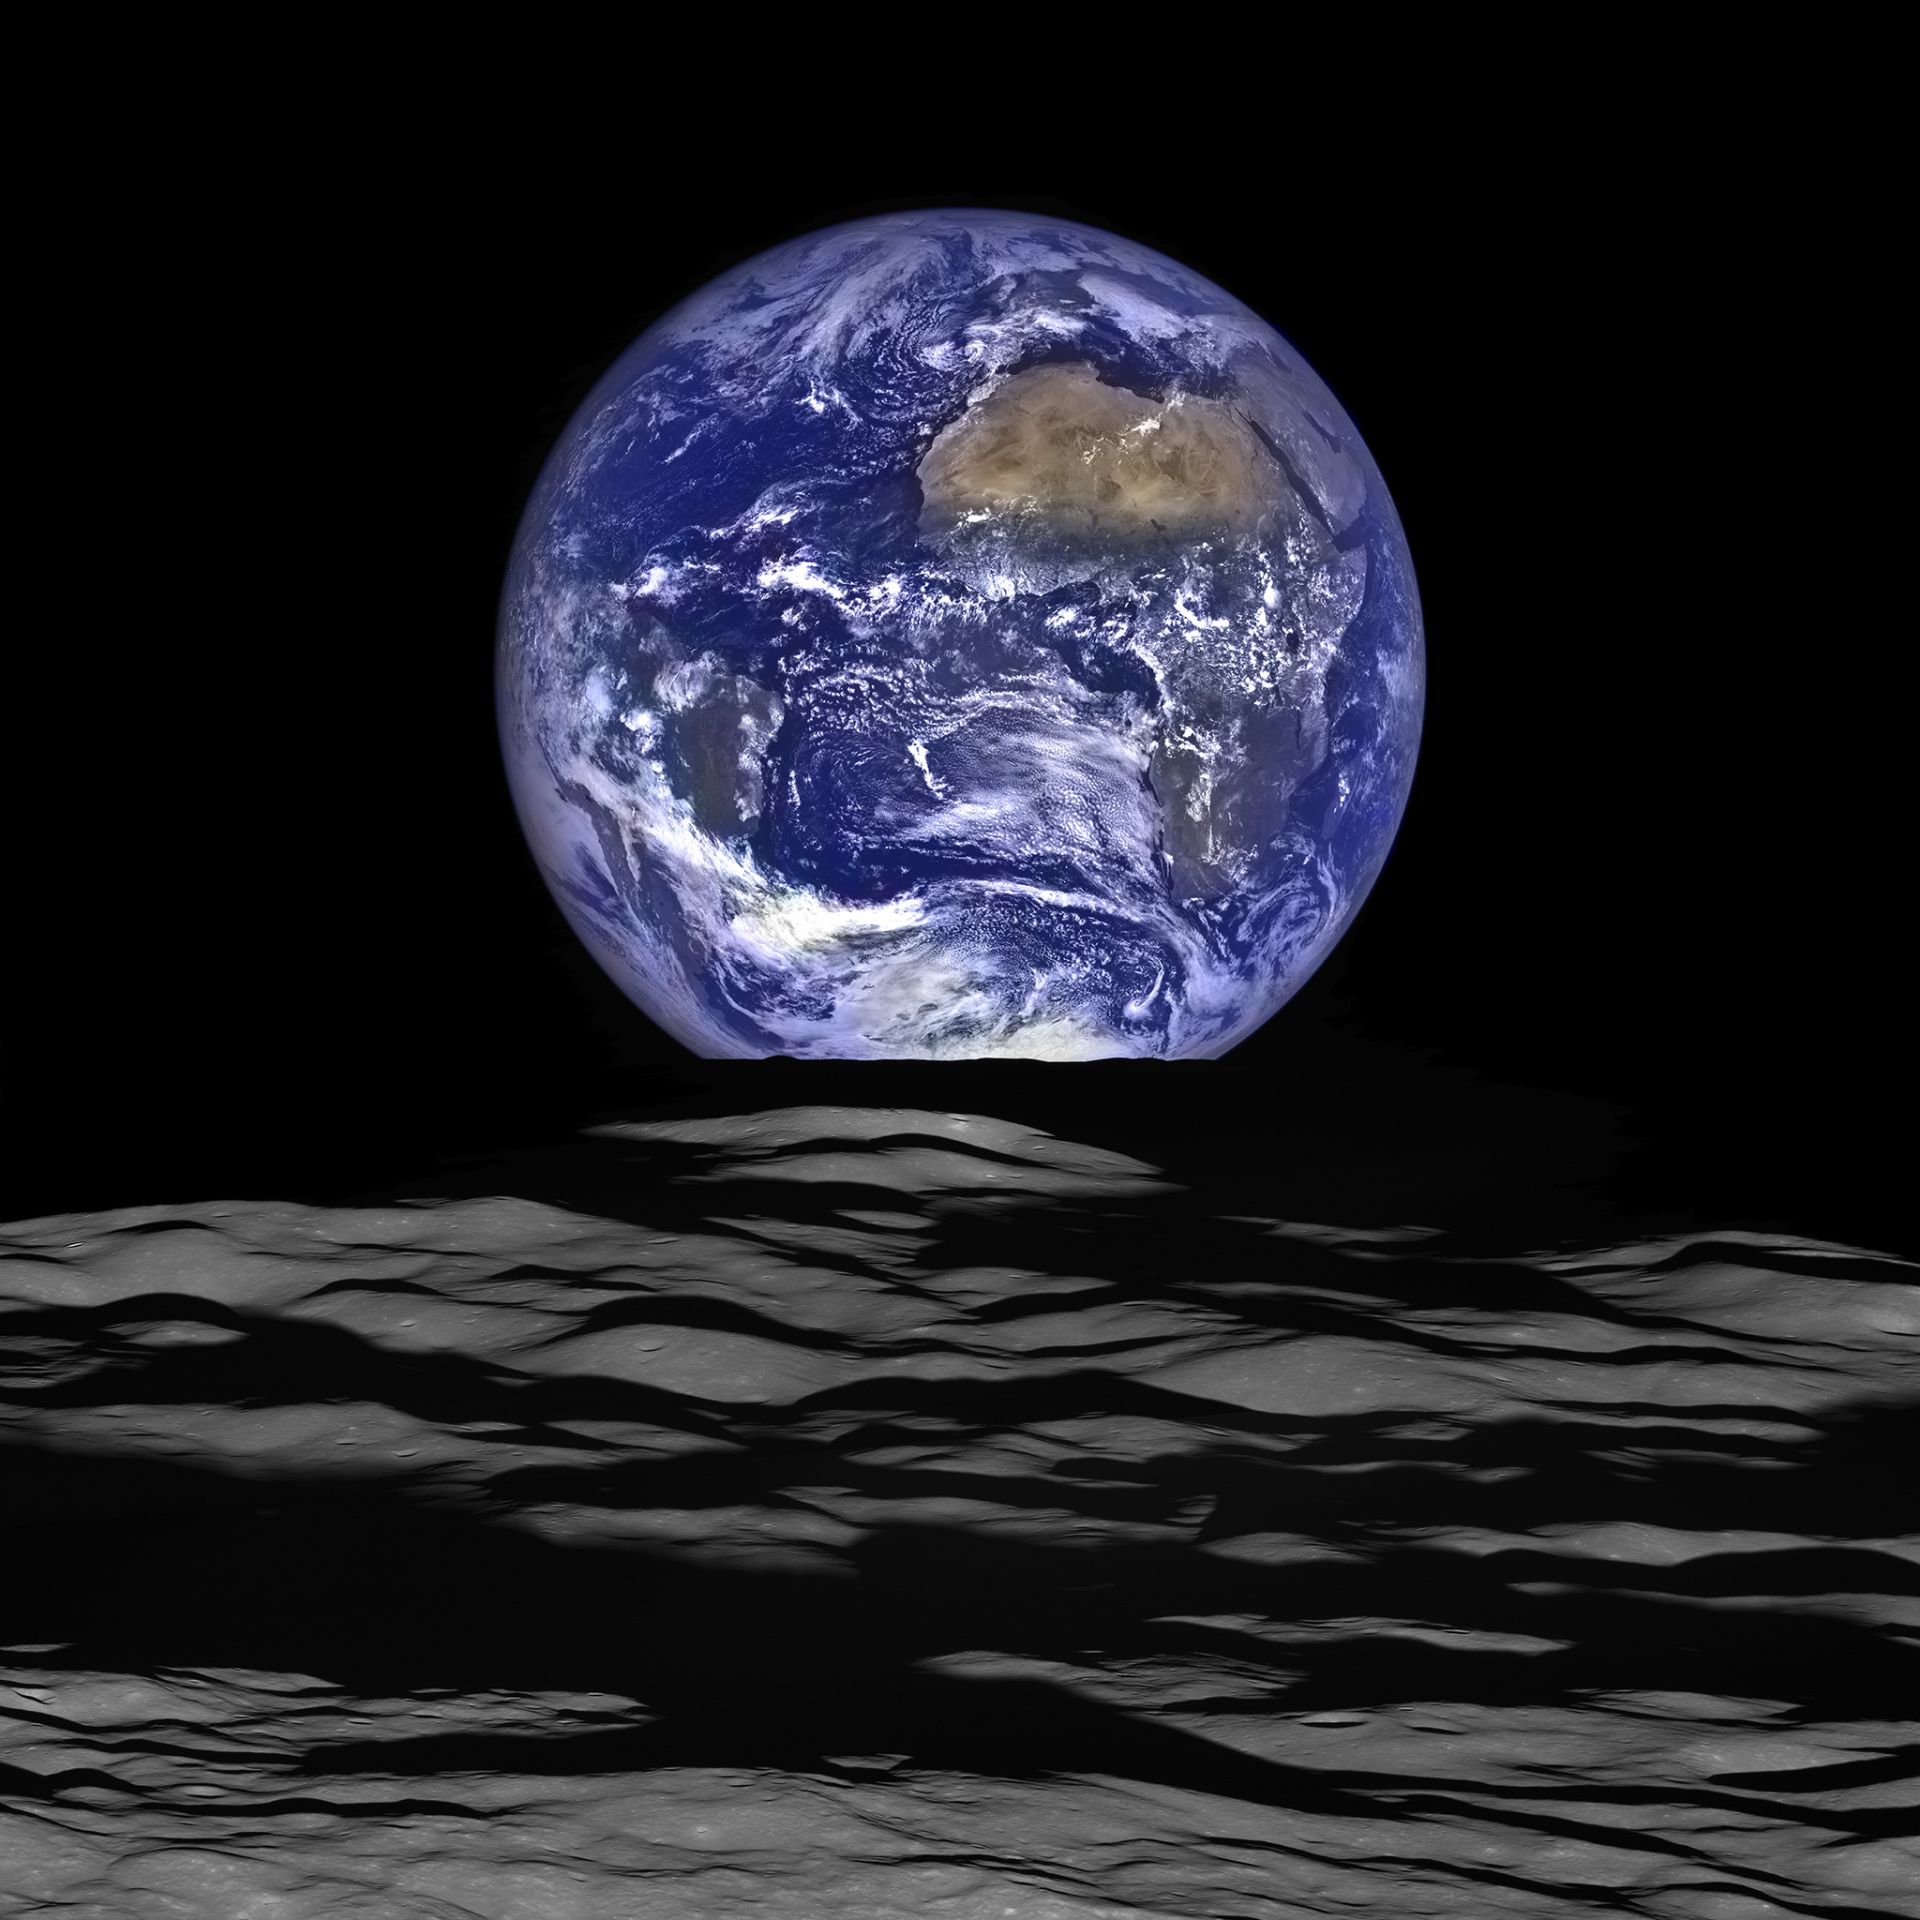 Earth as seen from the lunar lander